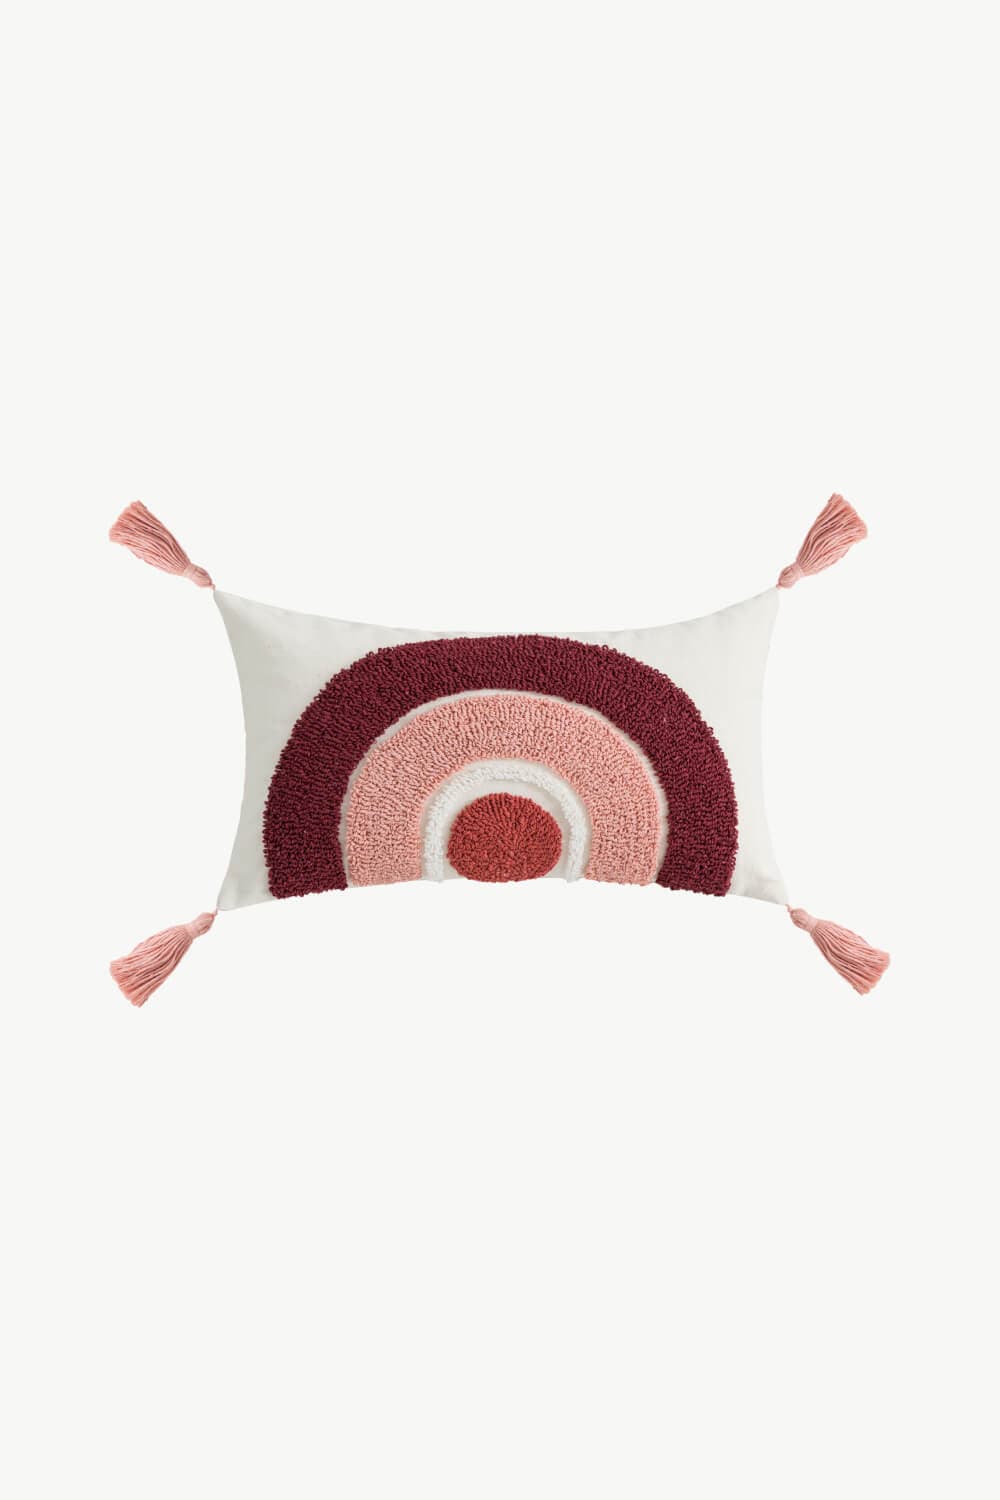 The Semicircle is Elongated Geometric Graphic Tassel Decorative Throw Pillow Case